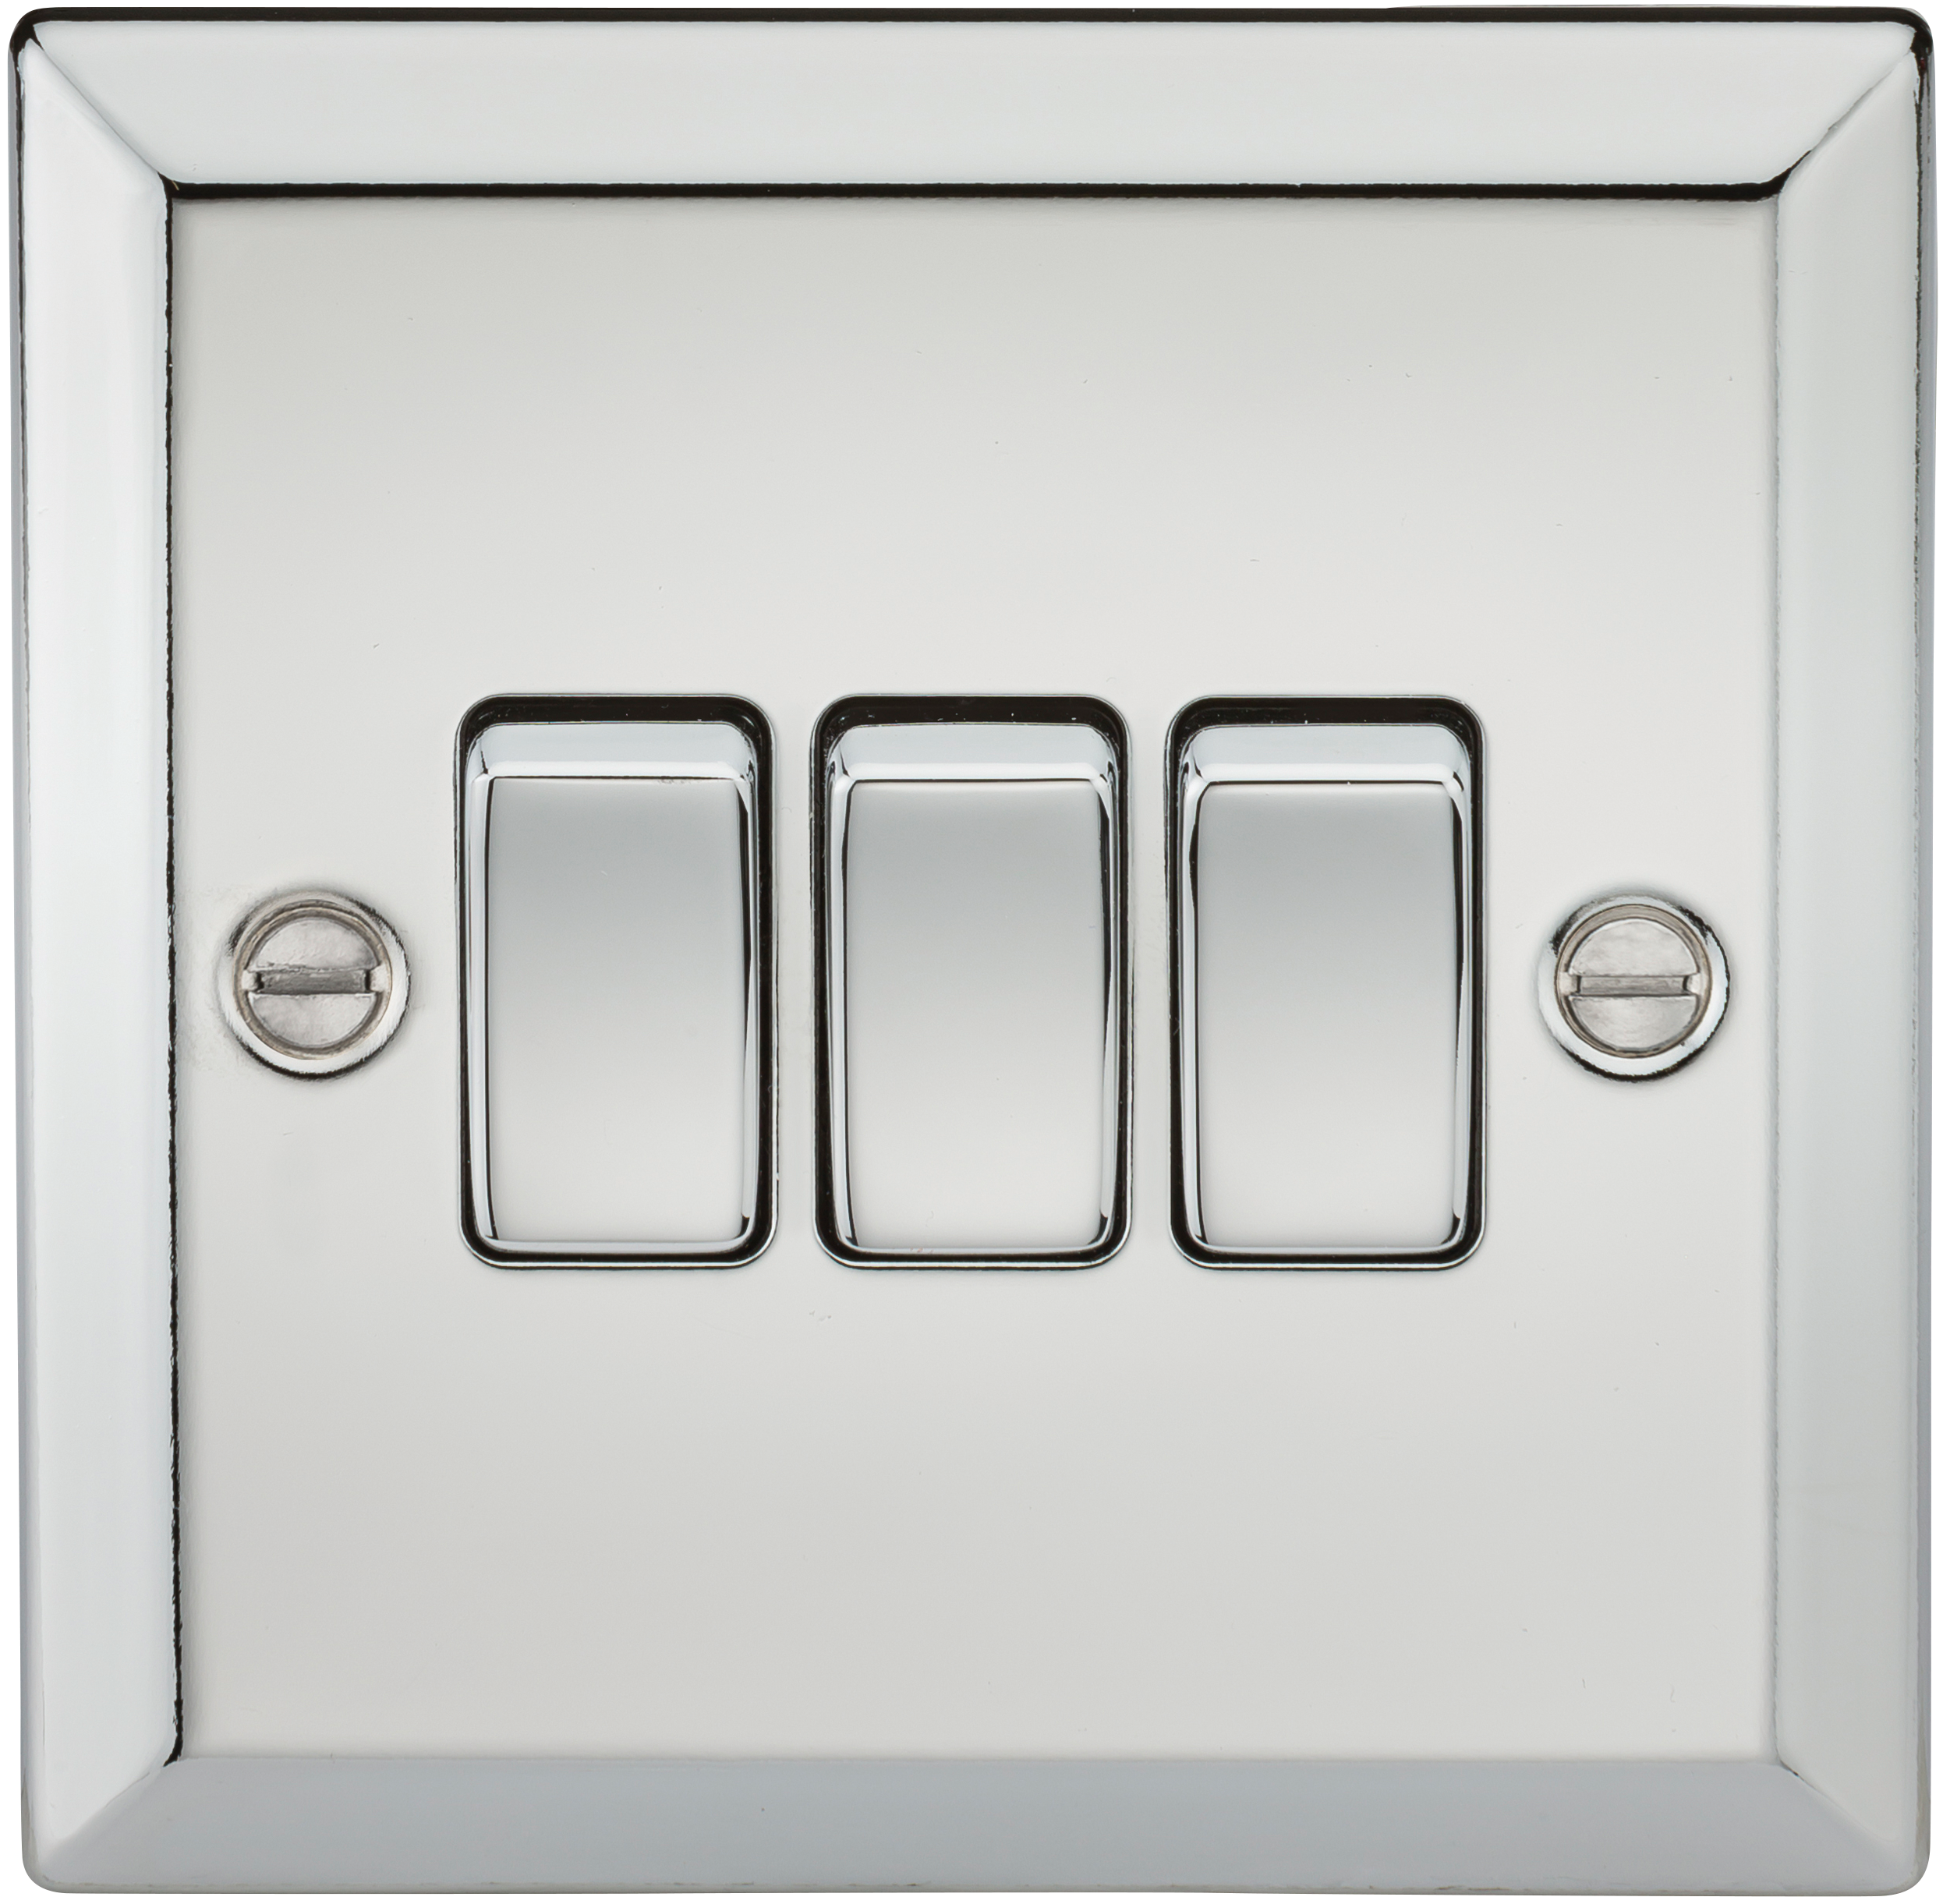 10A 3G 2 Way Plate Switch - Bevelled Edge Polished Chrome - CV4PC 